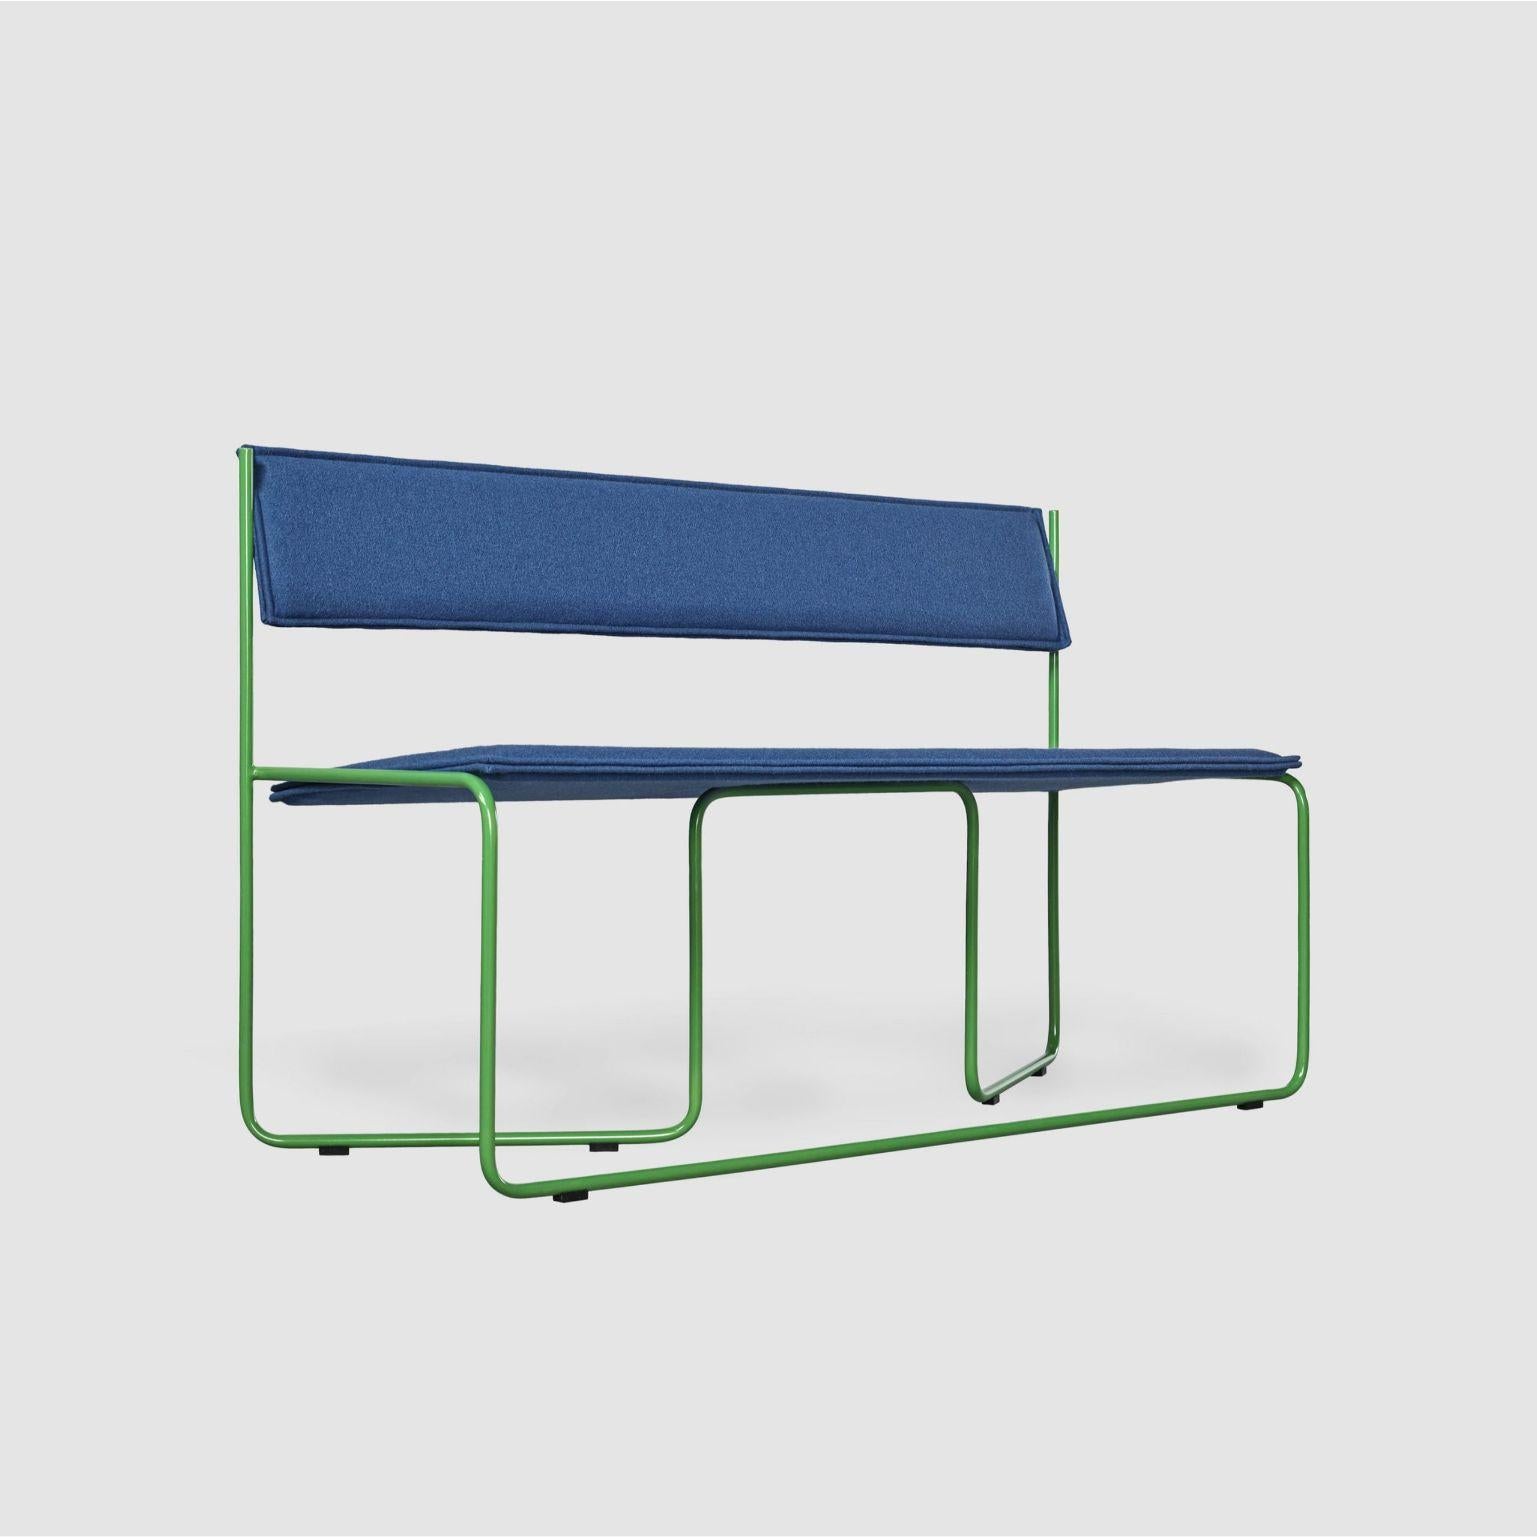 Set of 2 Trampolín bench, blue by Pepe Albargues
Dimensions: W135, D49, H83, Seat 44.
Materials: Chrome plated or painted iron structure.
Foam CMHR (high resilience and flame retardant) for all our cushion filling systems
Removable backrest and